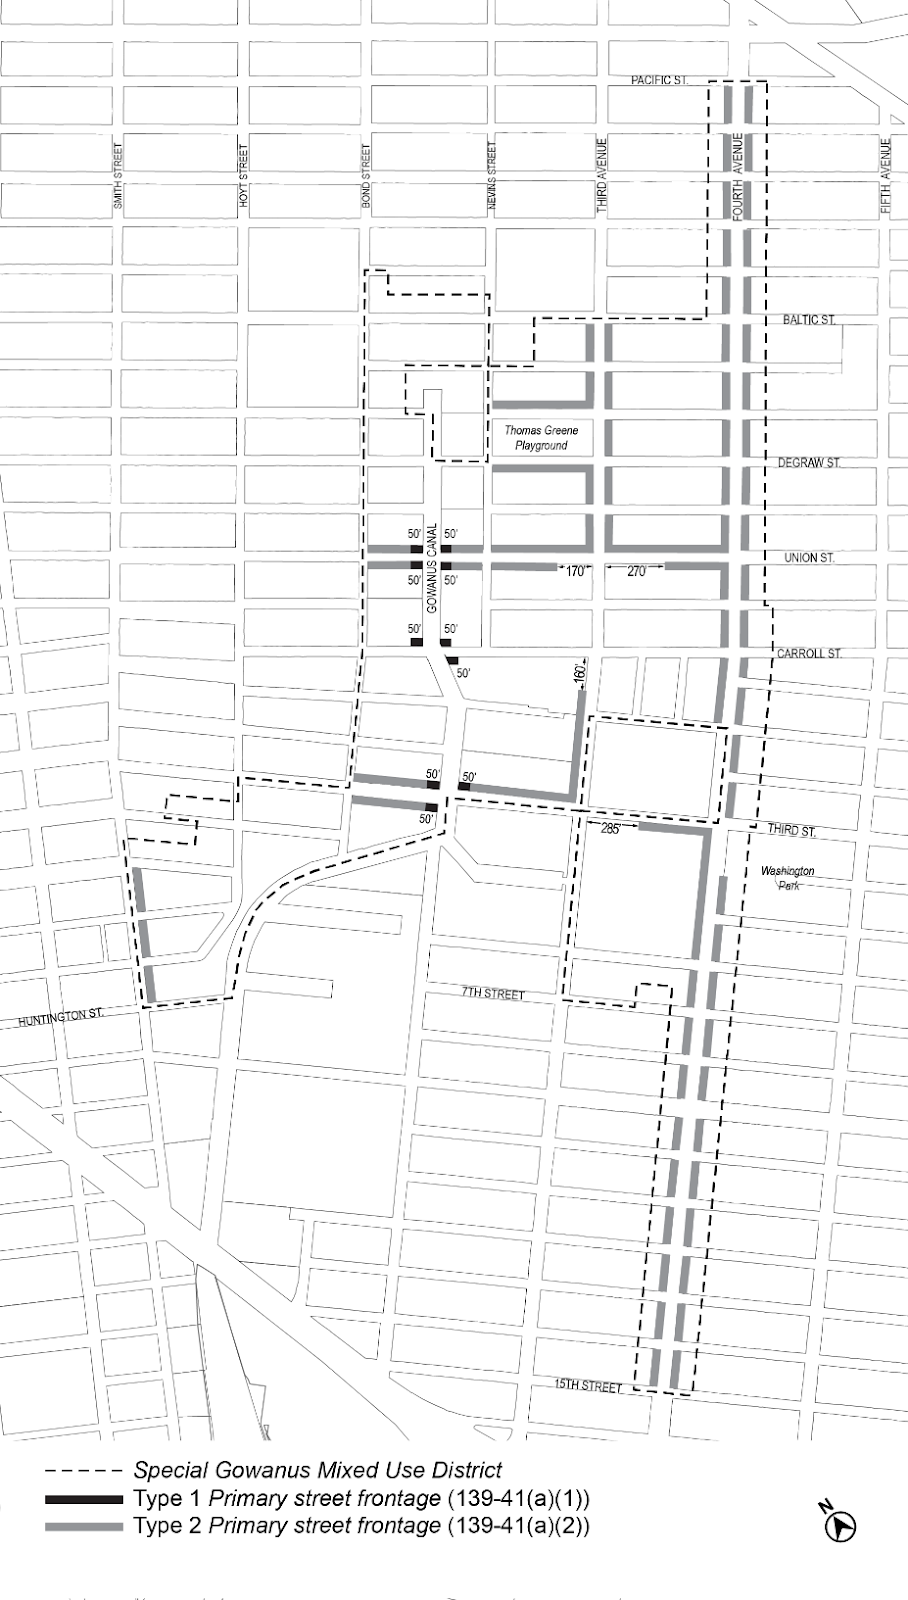 Zoning Resolutions Chapter 9: Special Gowanus Mixed Use District APPENDIX A.2